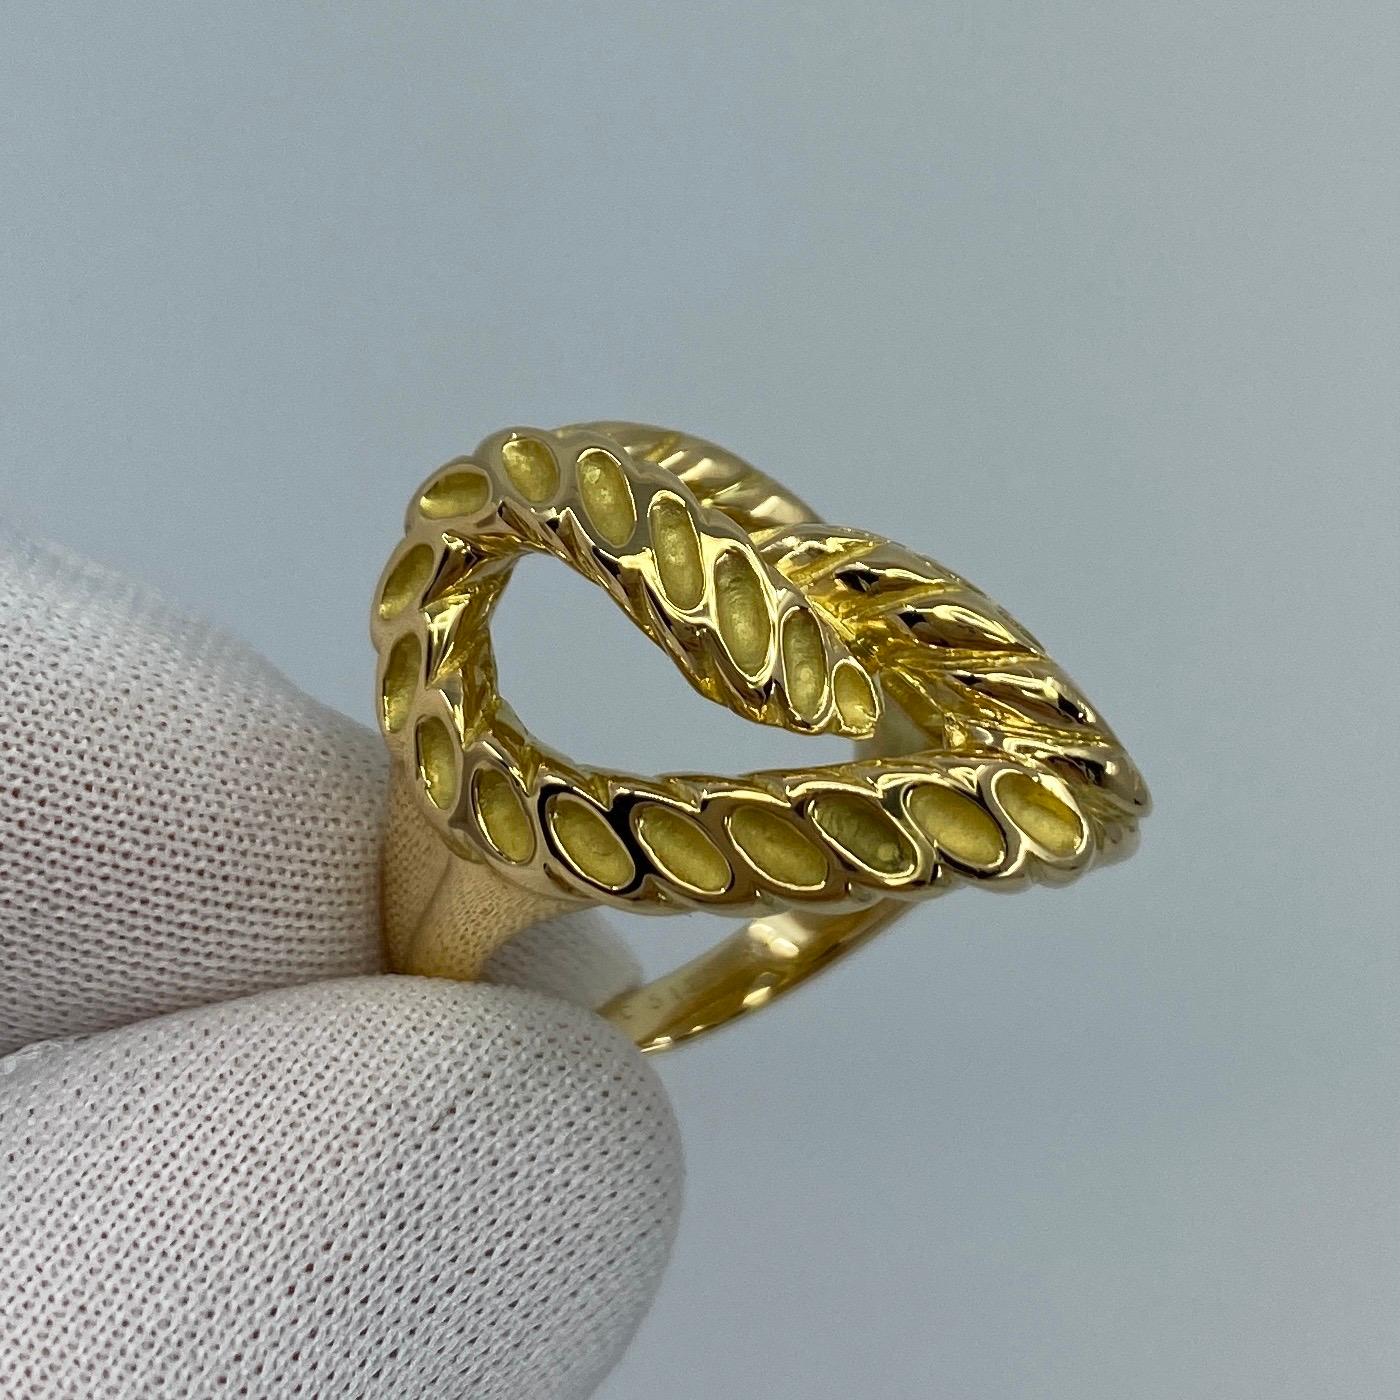 Rare Vintage Van Cleef & Arpels 18k Yellow Gold Braid Rope Motif Ring with Box For Sale 2